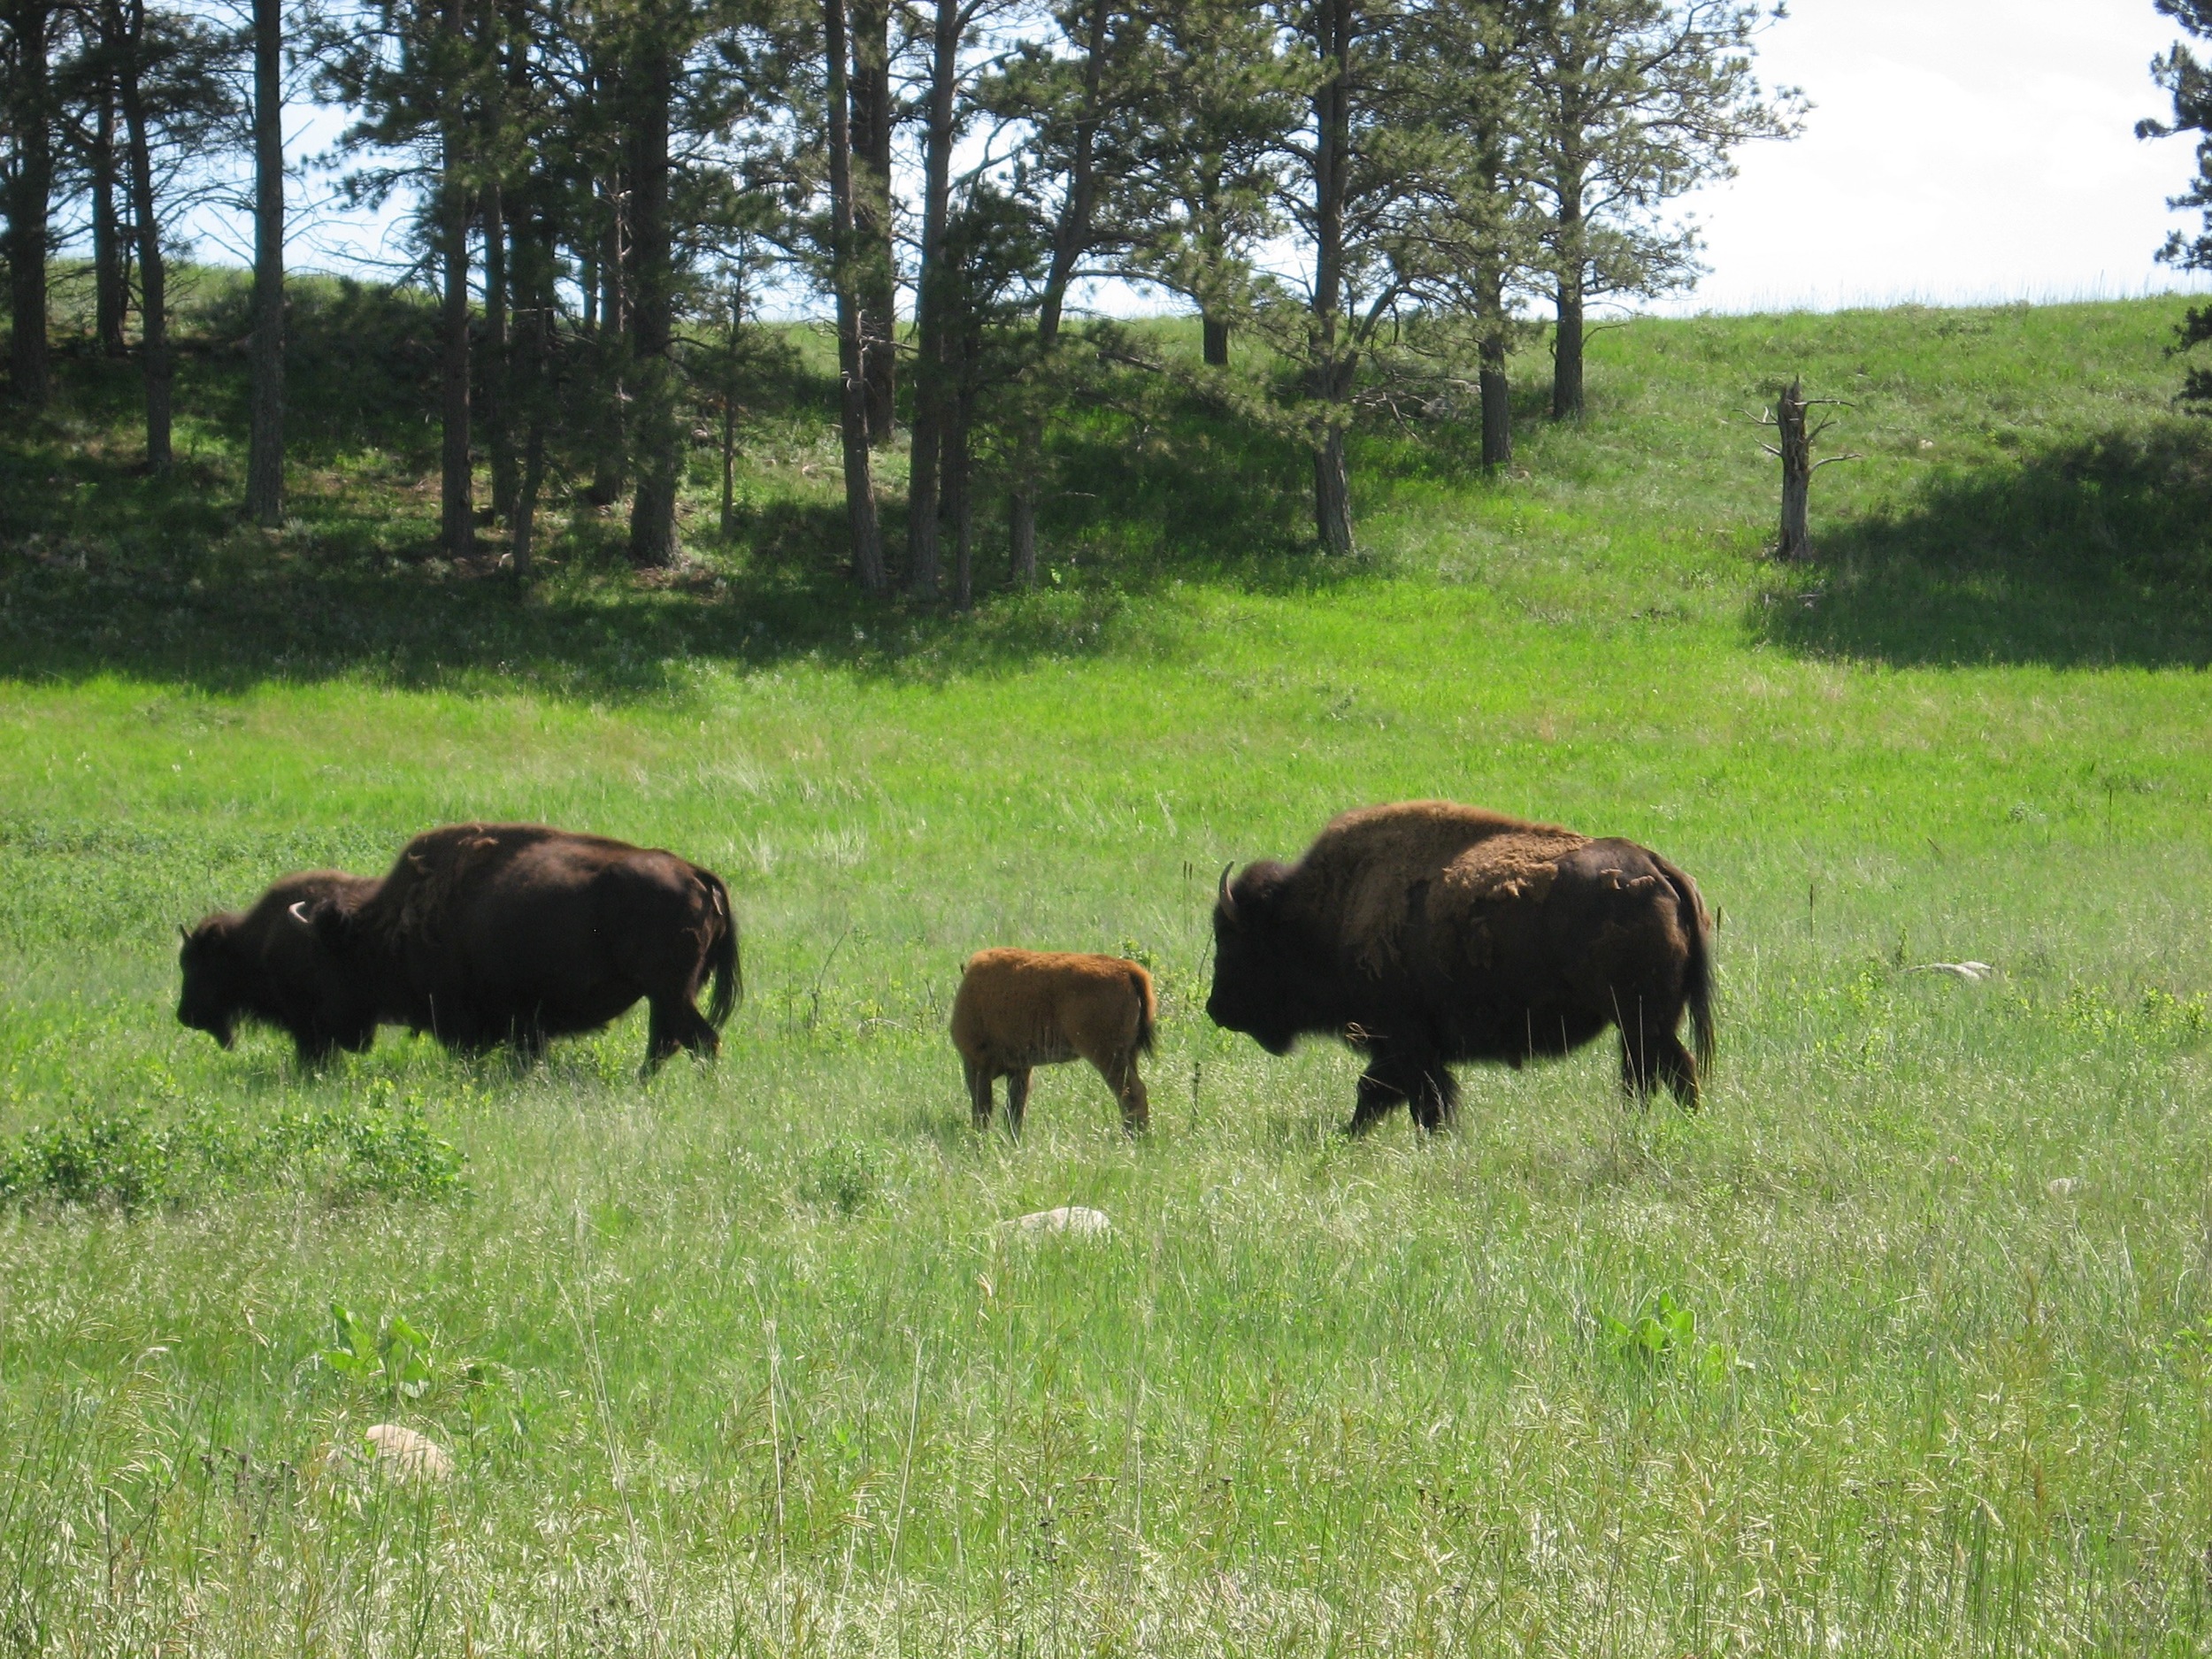 More Baby Bison